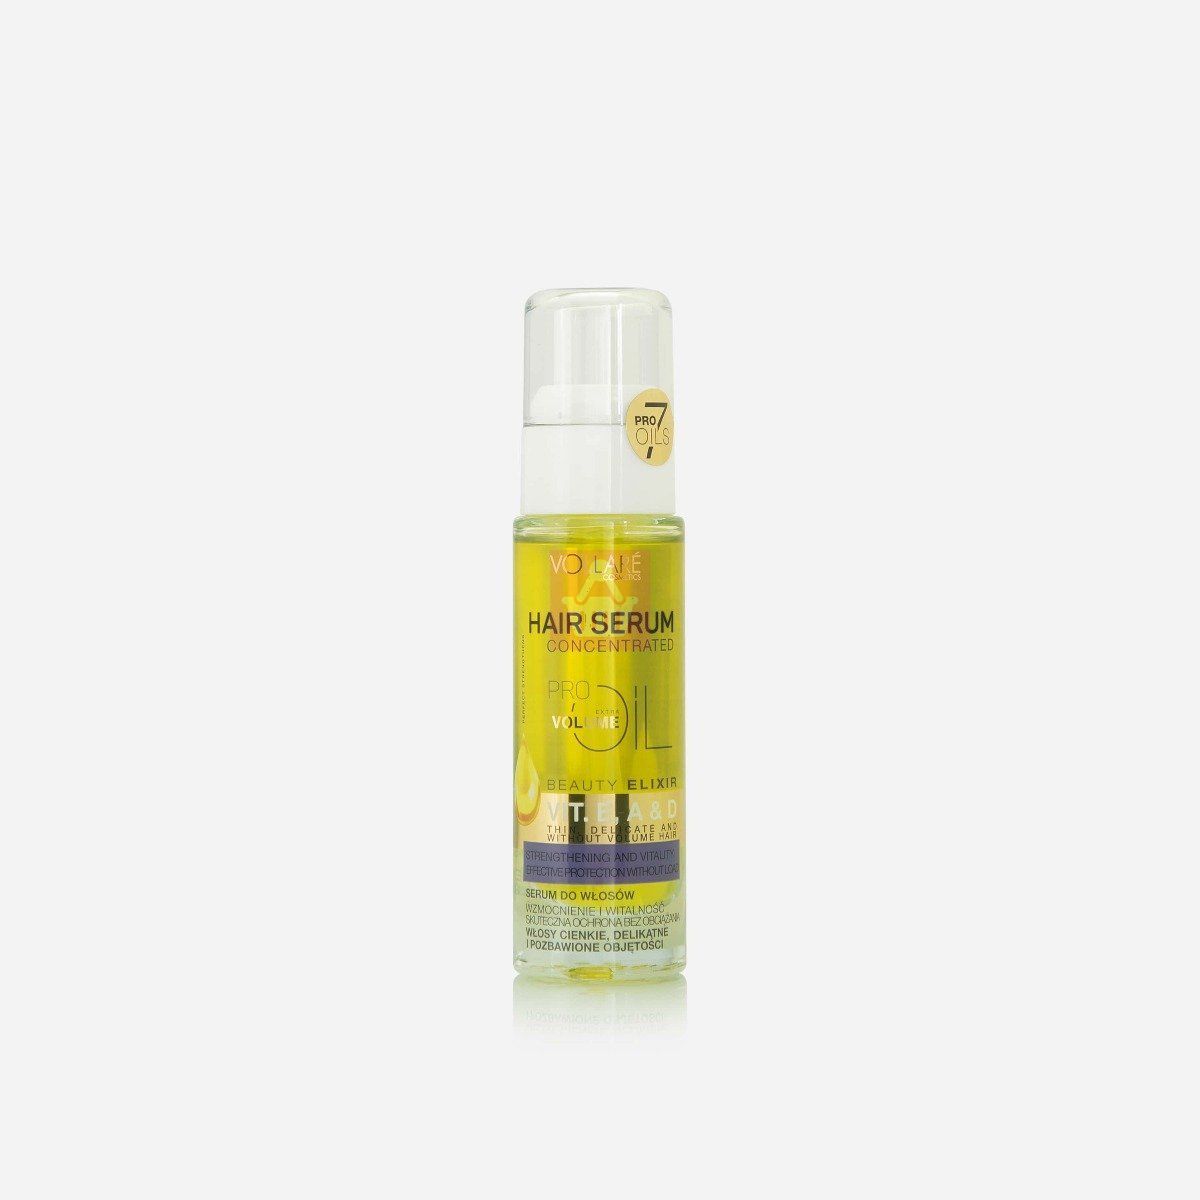 Vollare Vitamin E, A & D Concentrated Hair Serum For Thin & Delicate Hair -  30ml